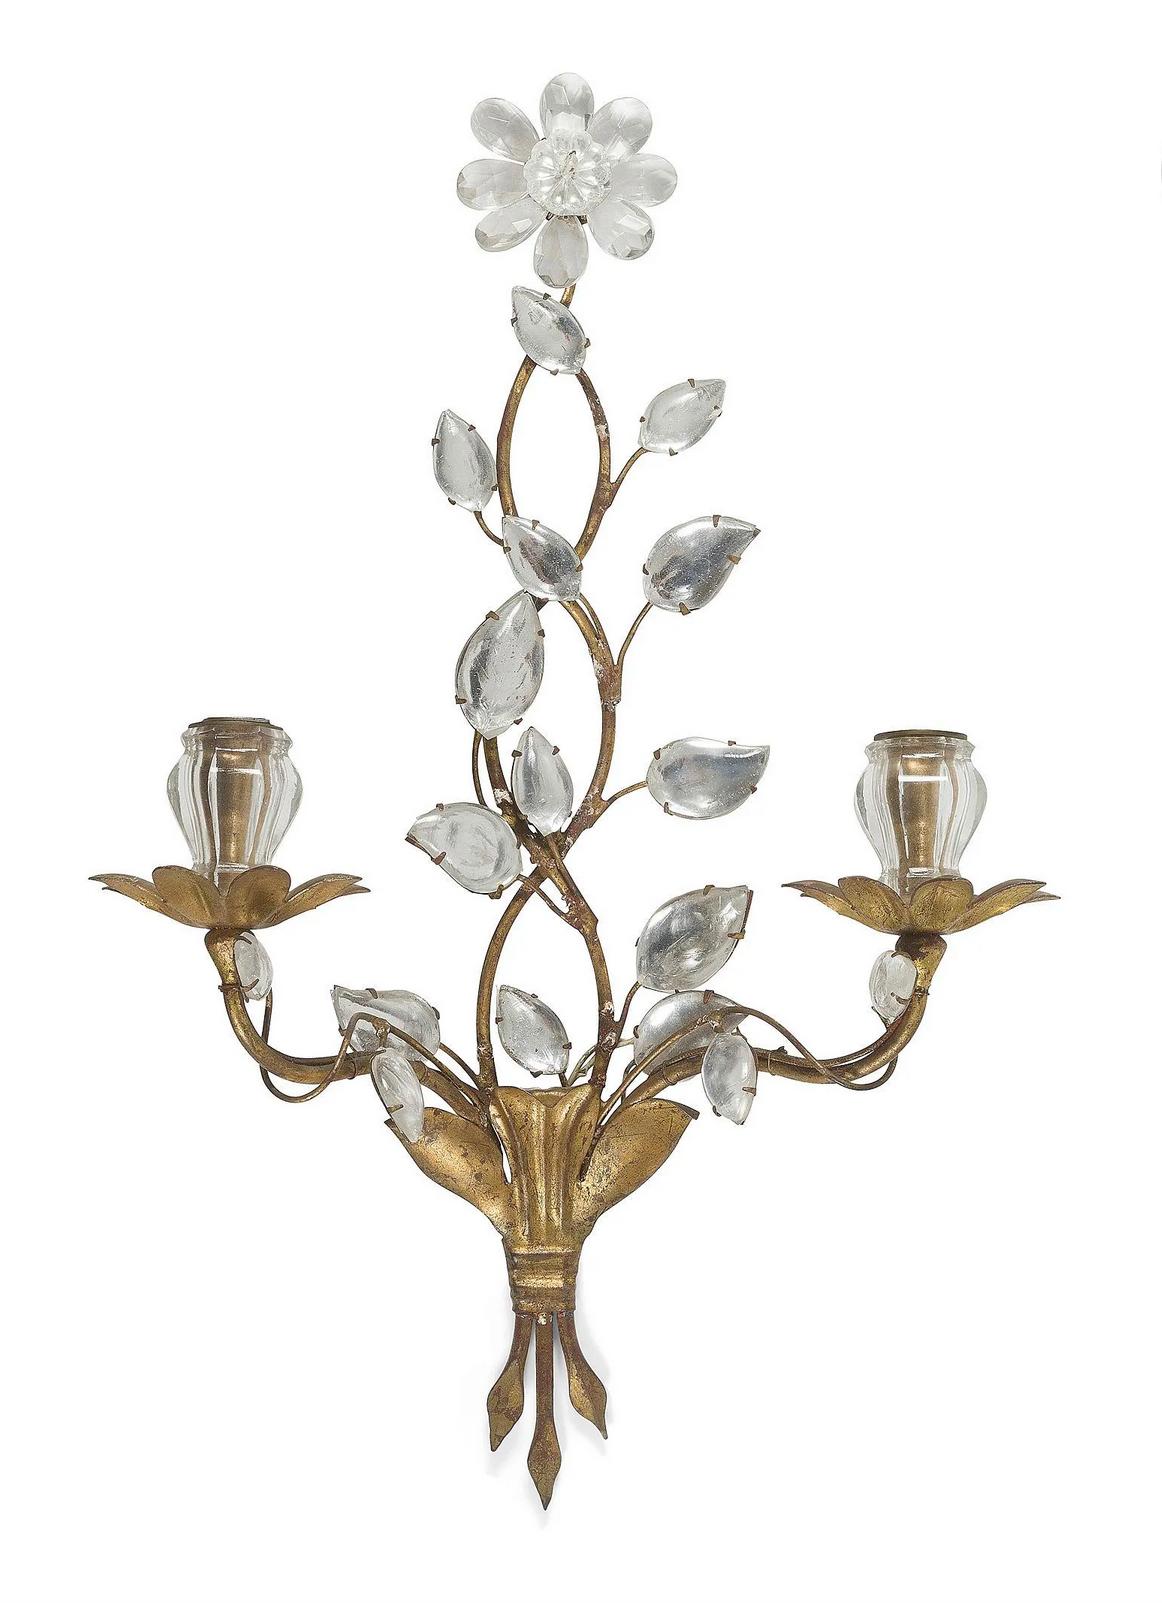 Chandelier with 6 arms and pair of sconces arms are in gilded metal on a red plate, and the molded glass leaves on a silver tain background, the bobeches and daisies molded glass,
Height of the wall sconces 40 cm width 25 cm, depth 11 cm.
Good